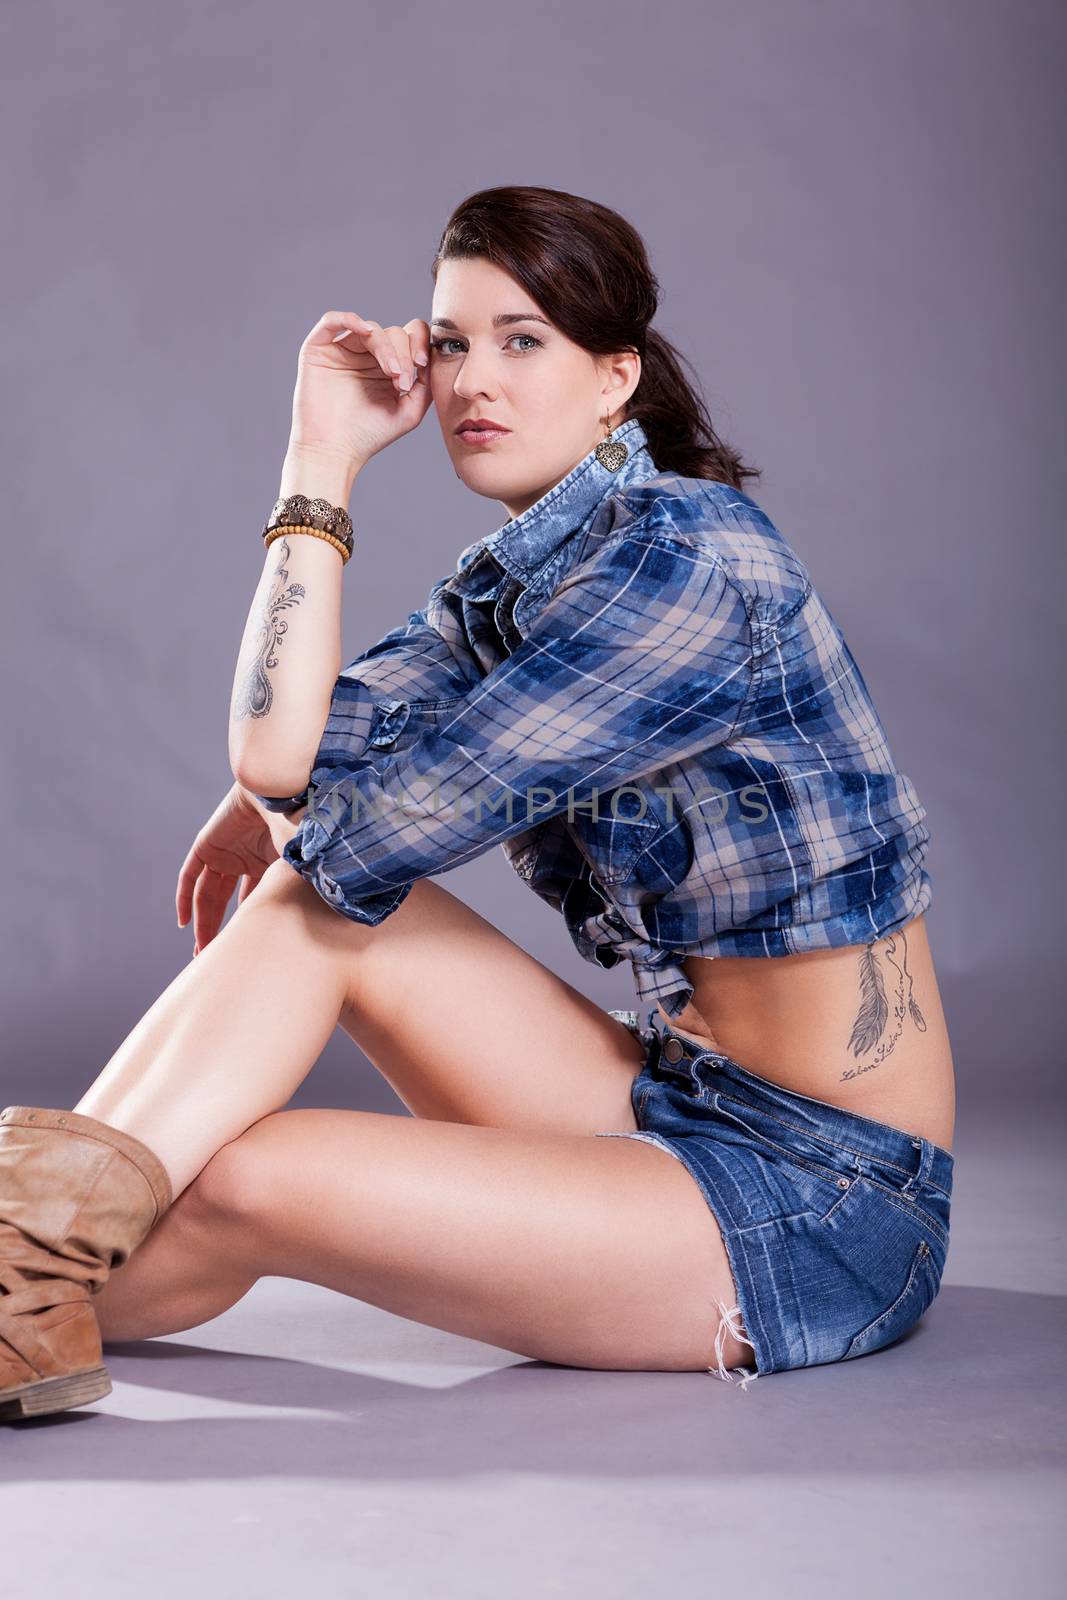 Beautiful single woman in western style boots, jeans shorts and blue flannel shirt with tattooed arm sitting over gray background